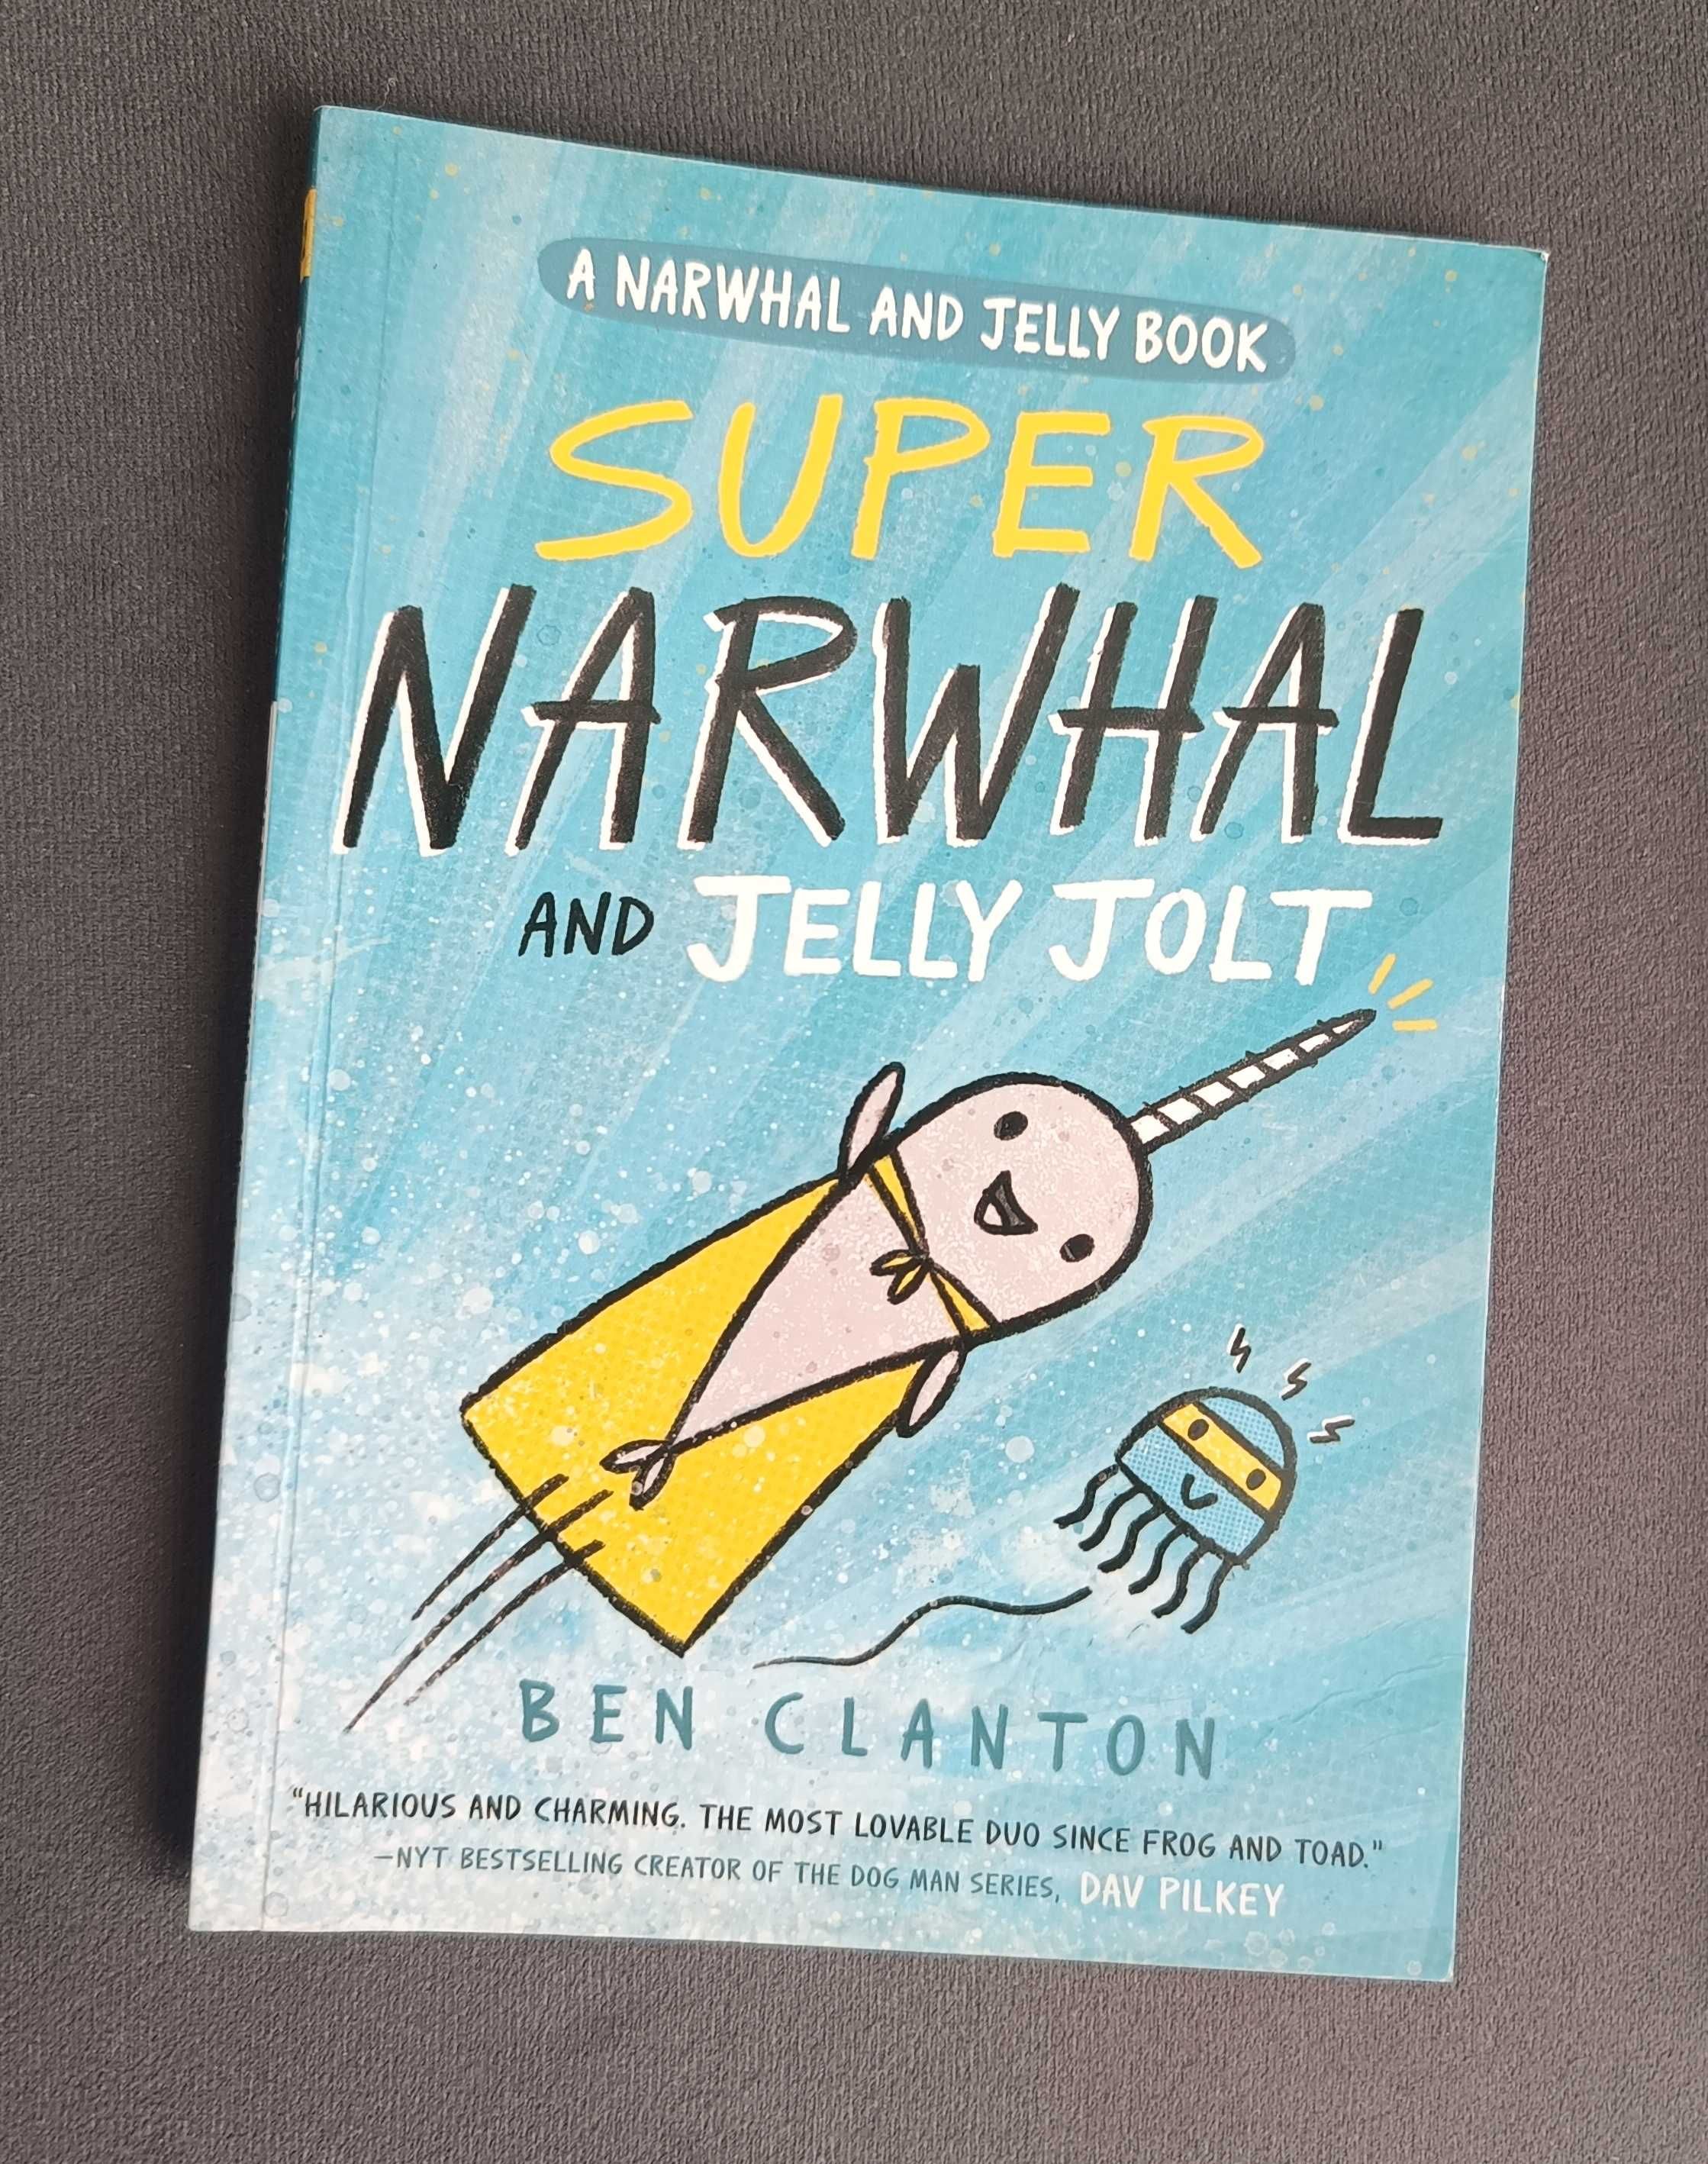 Ben Clanton - Super Narwhal and jelly jolt